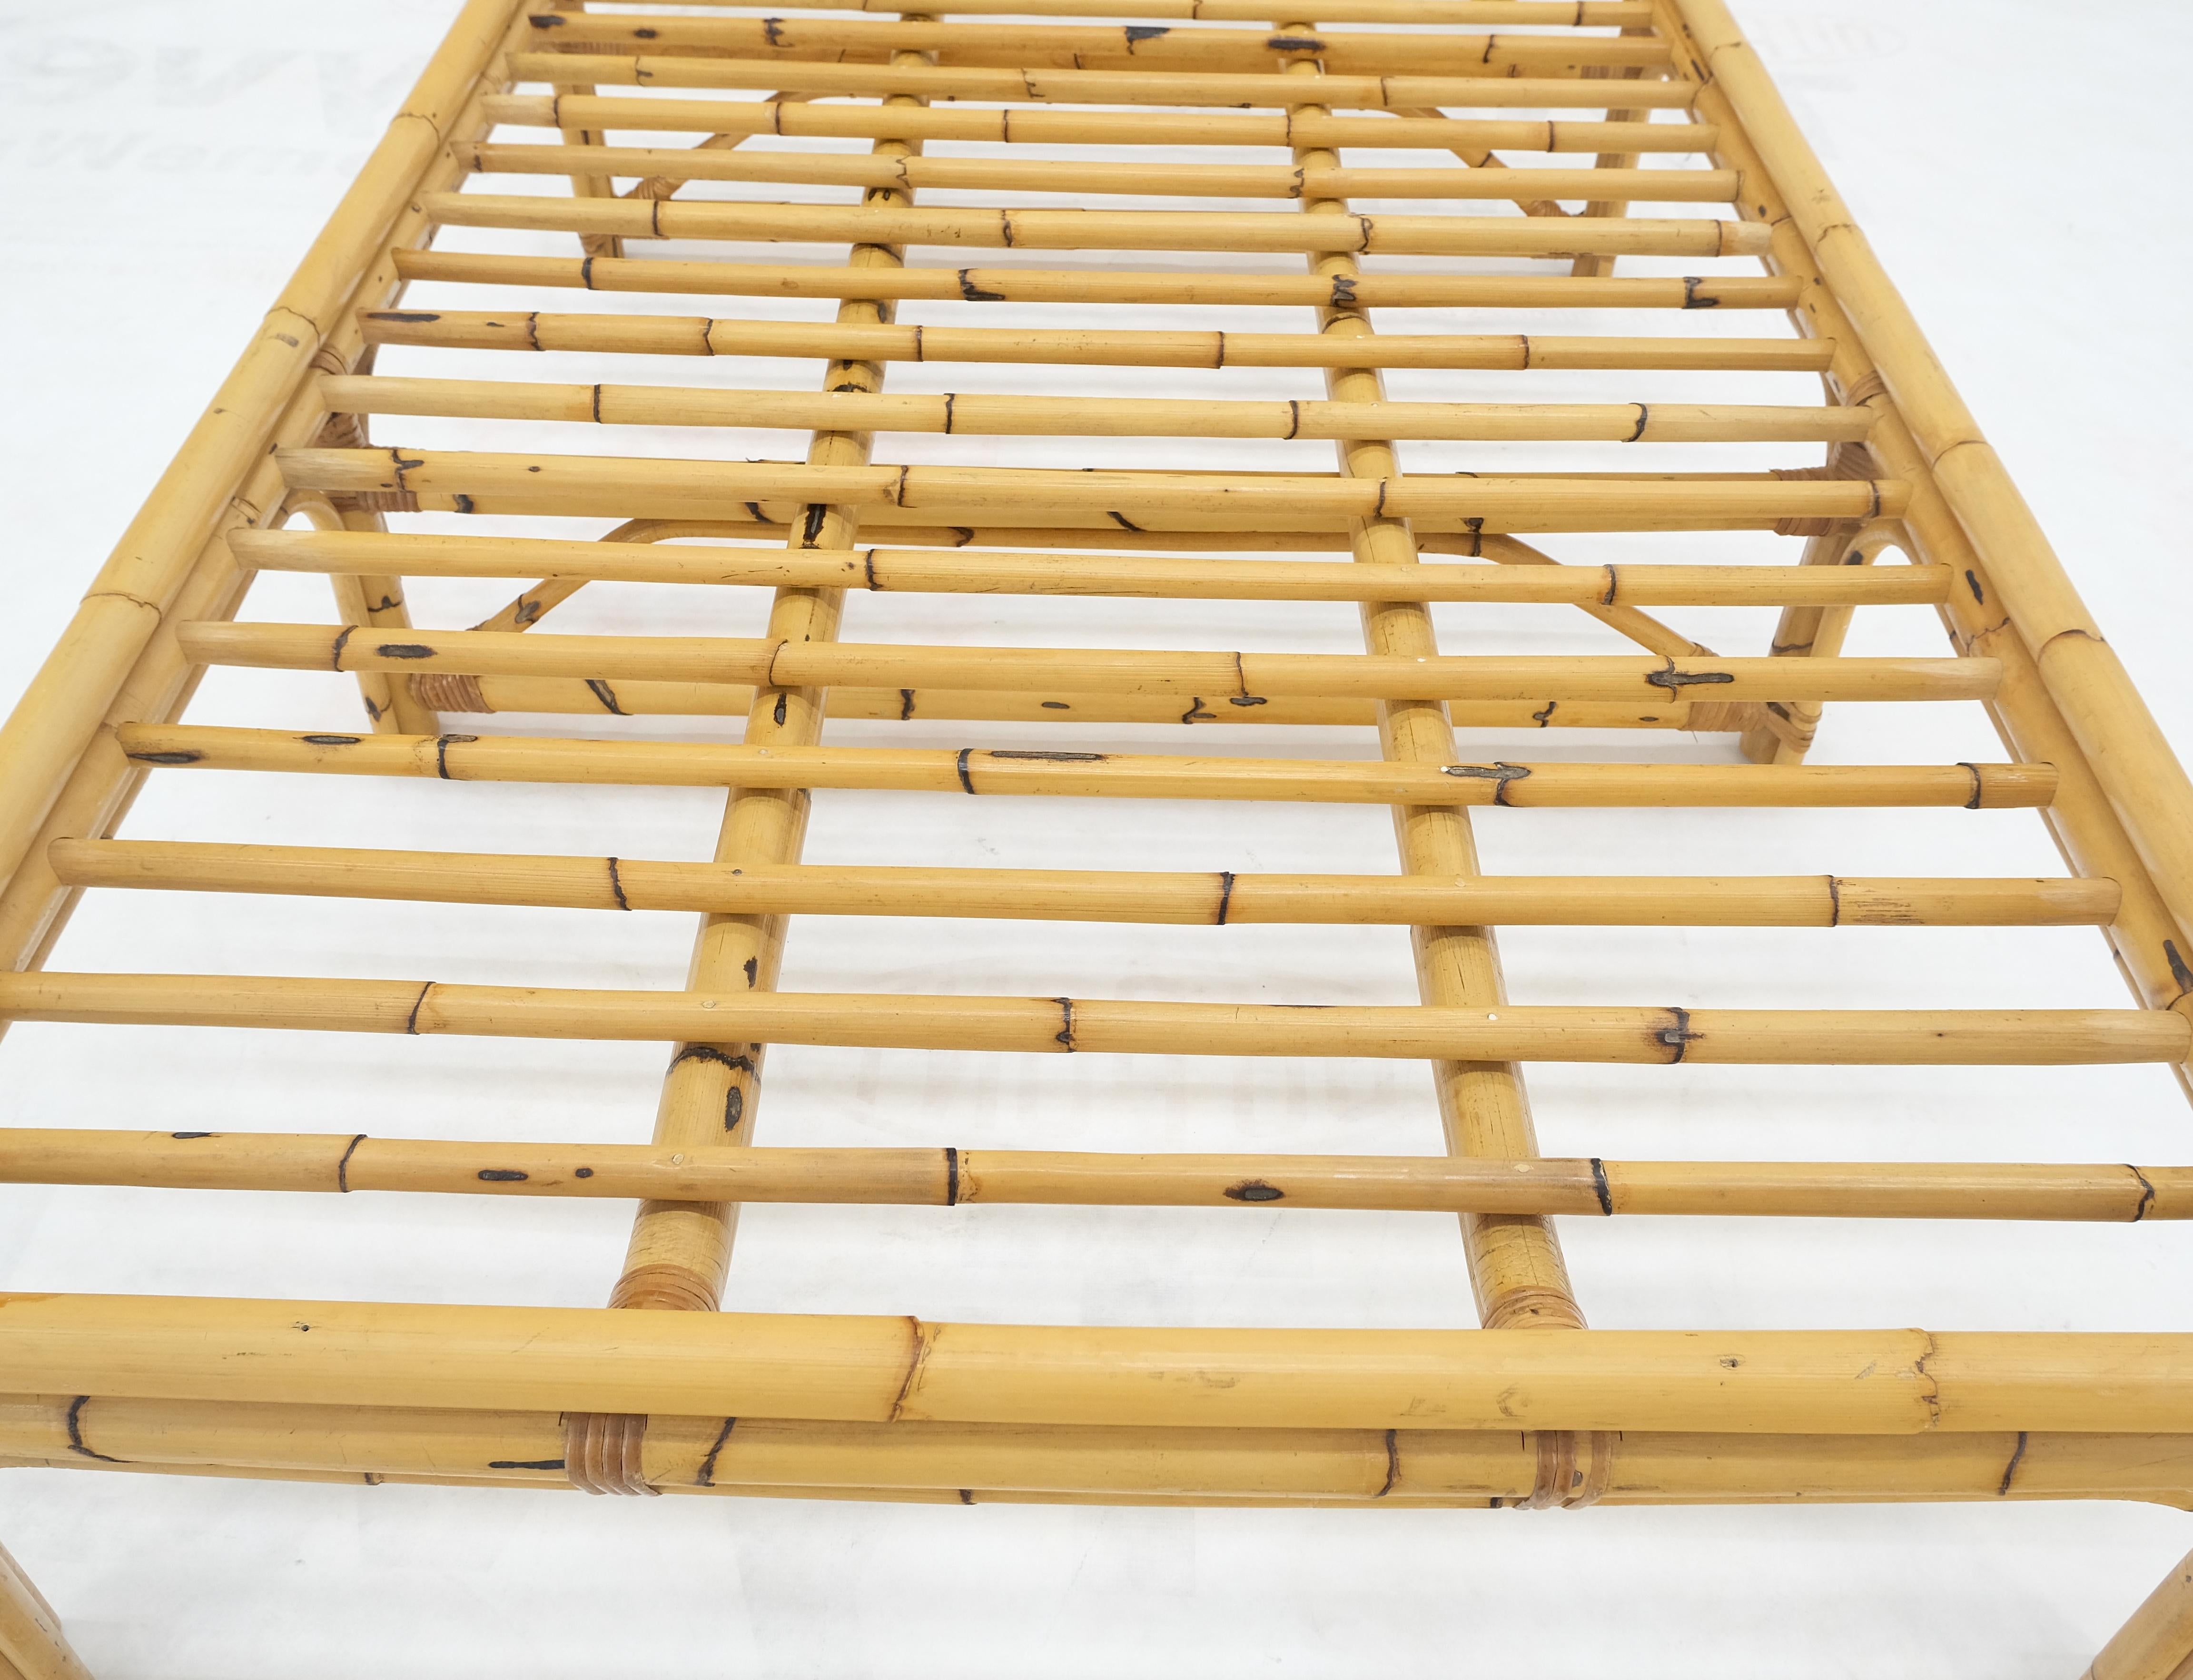 Vintage 1970s Large Bamboo Chaise Lounge Daybed Frame MINT! (20. Jahrhundert) im Angebot